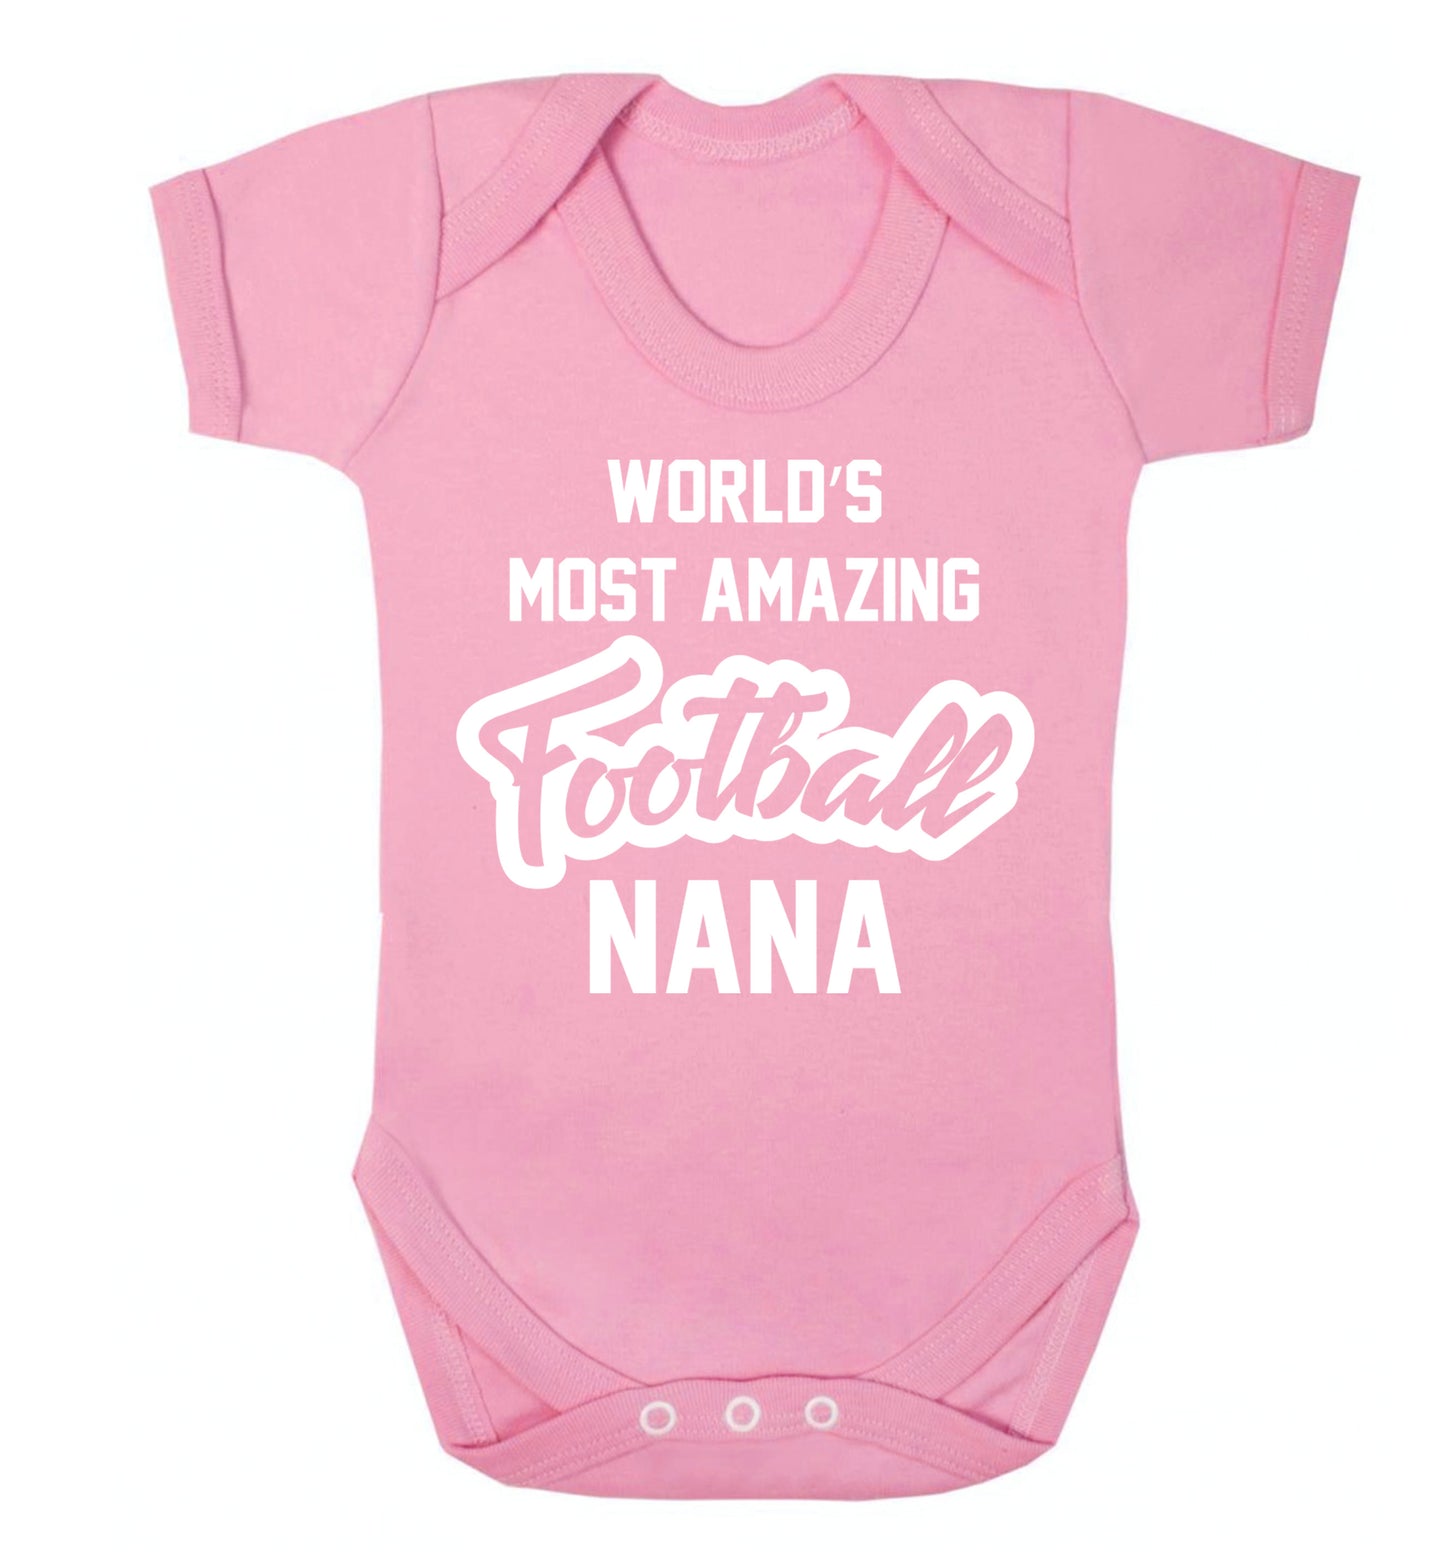 Worlds most amazing football nana Baby Vest pale pink 18-24 months